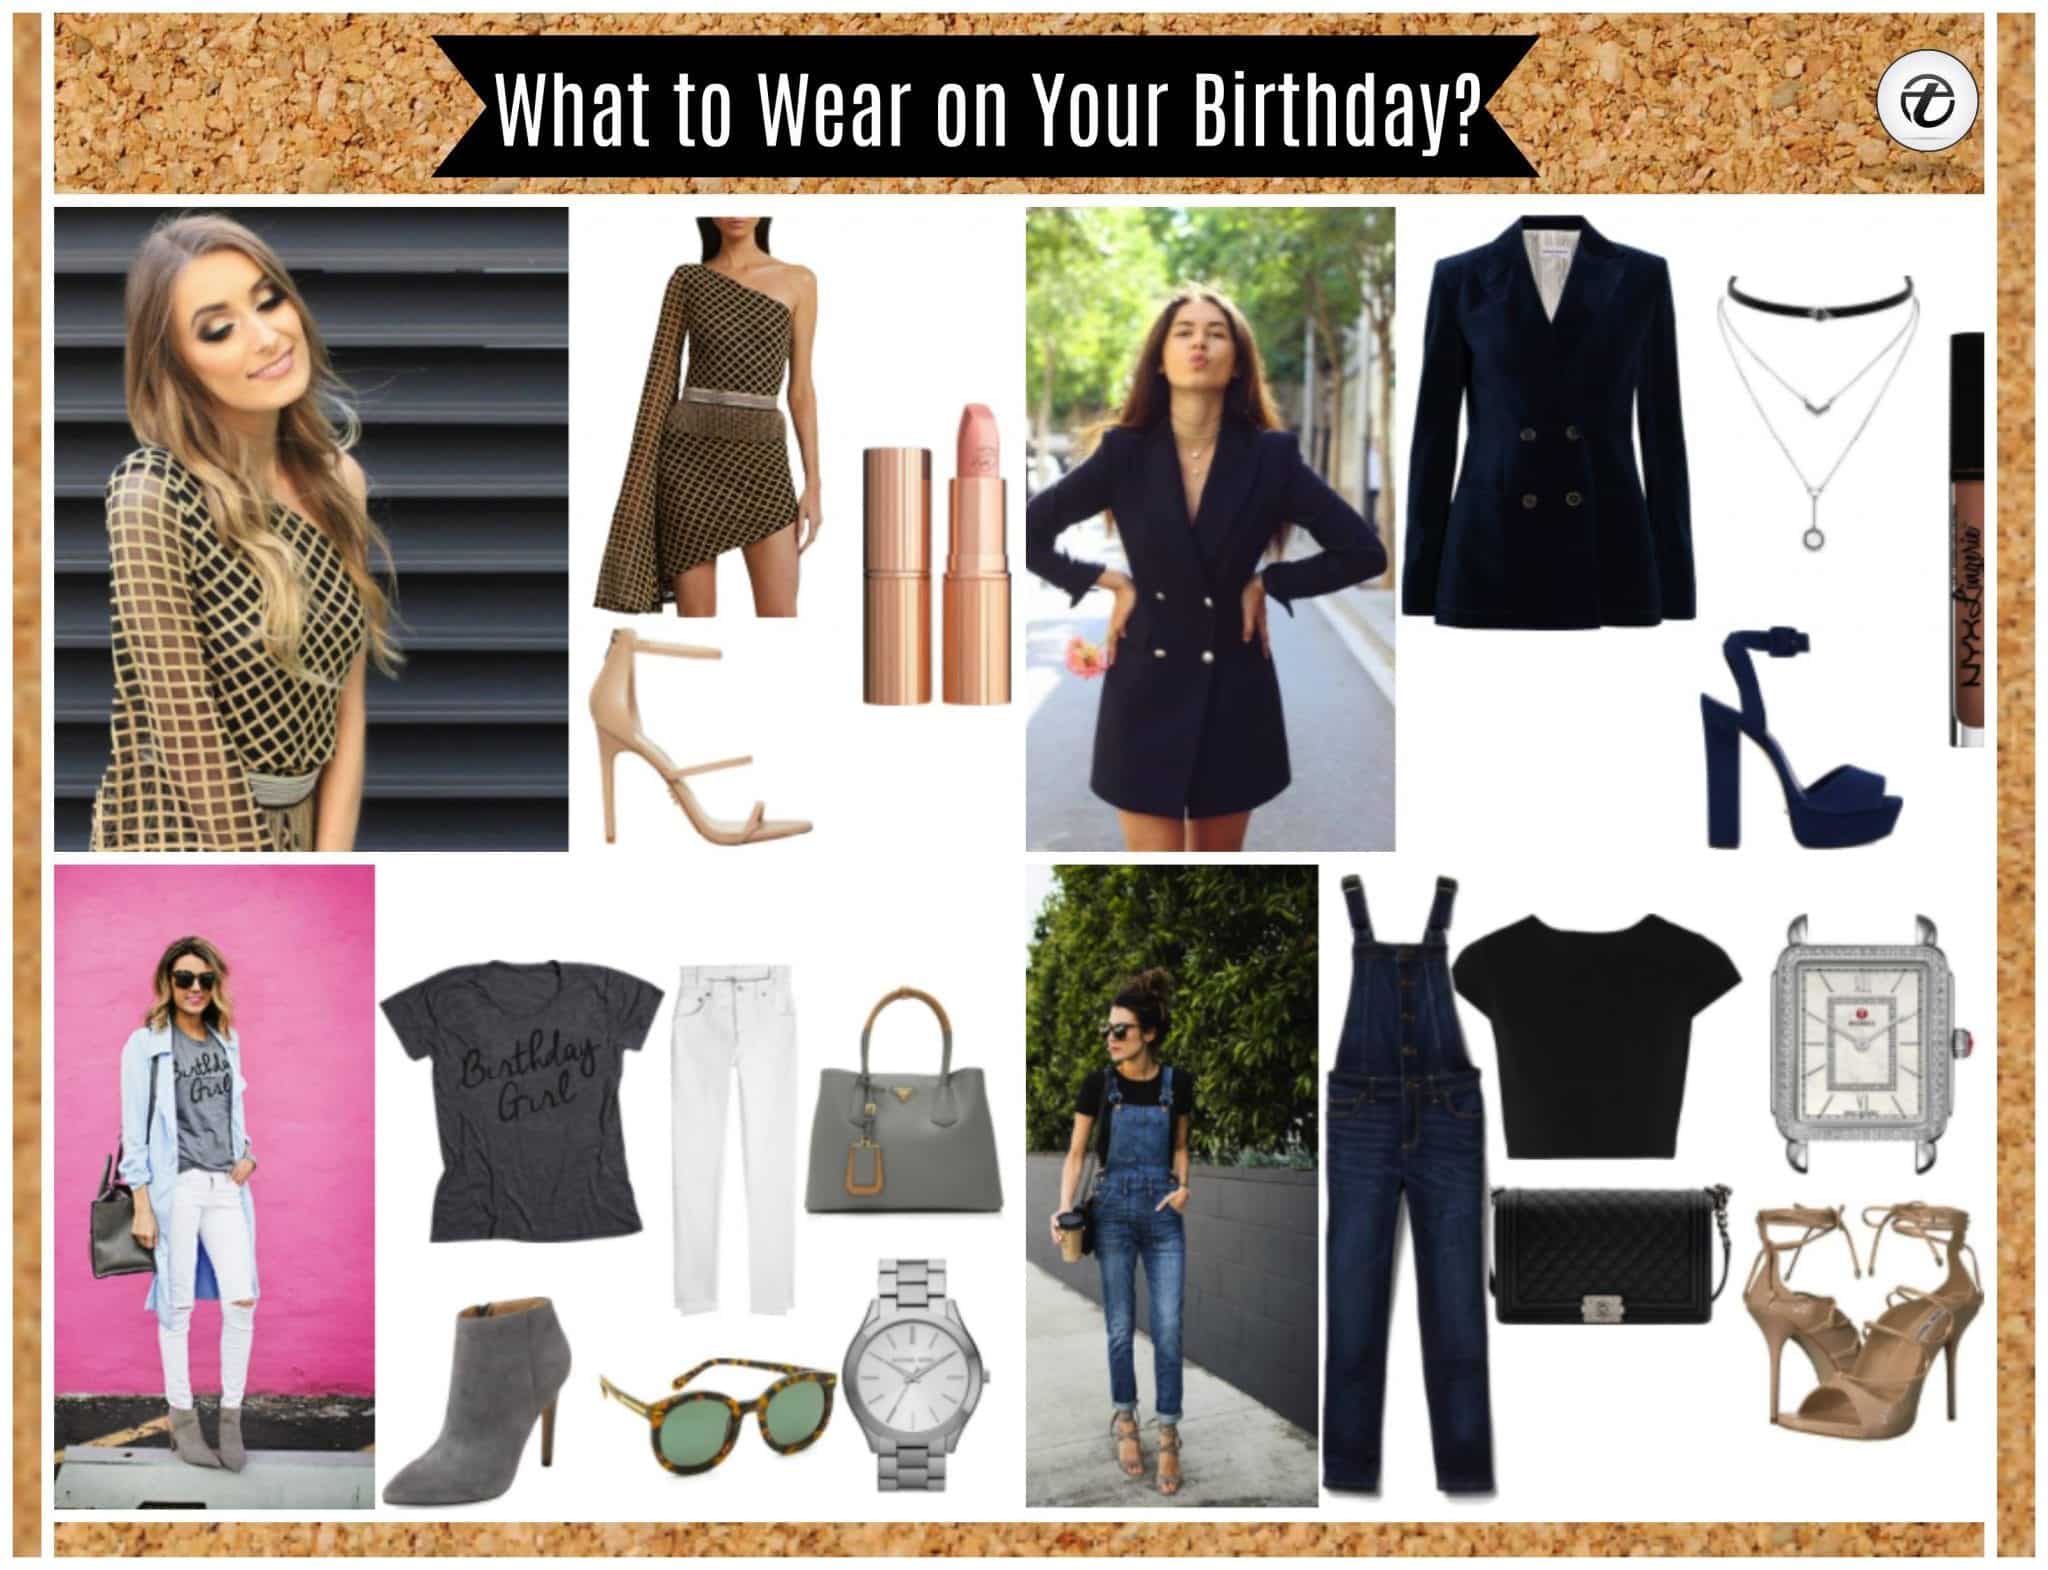 What can i wear on my birthday